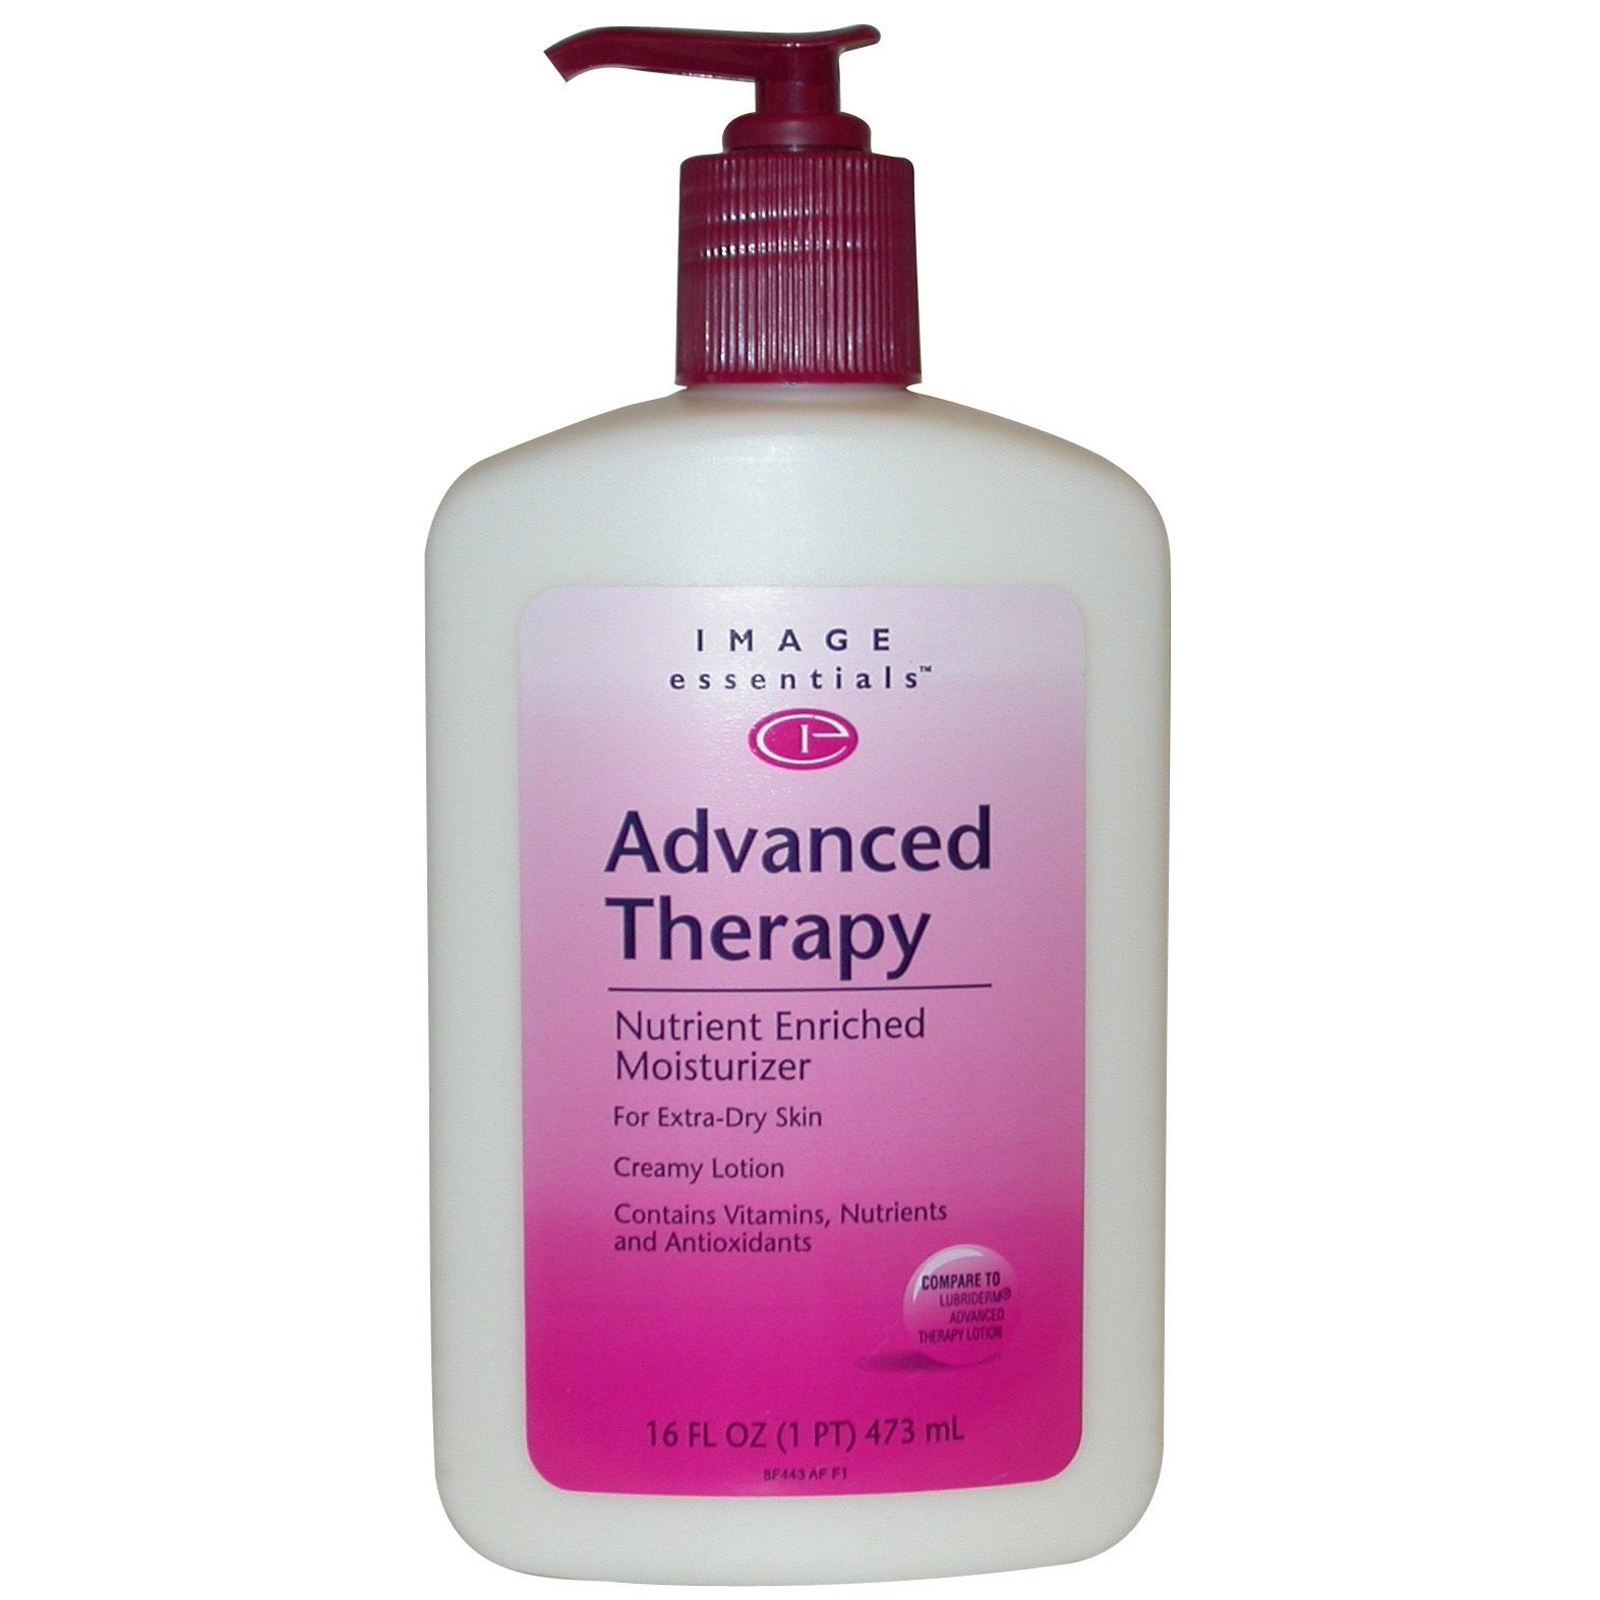 Image Essentials Nutrient Enriched Moisturizer Advanced Therapy 16 ounce